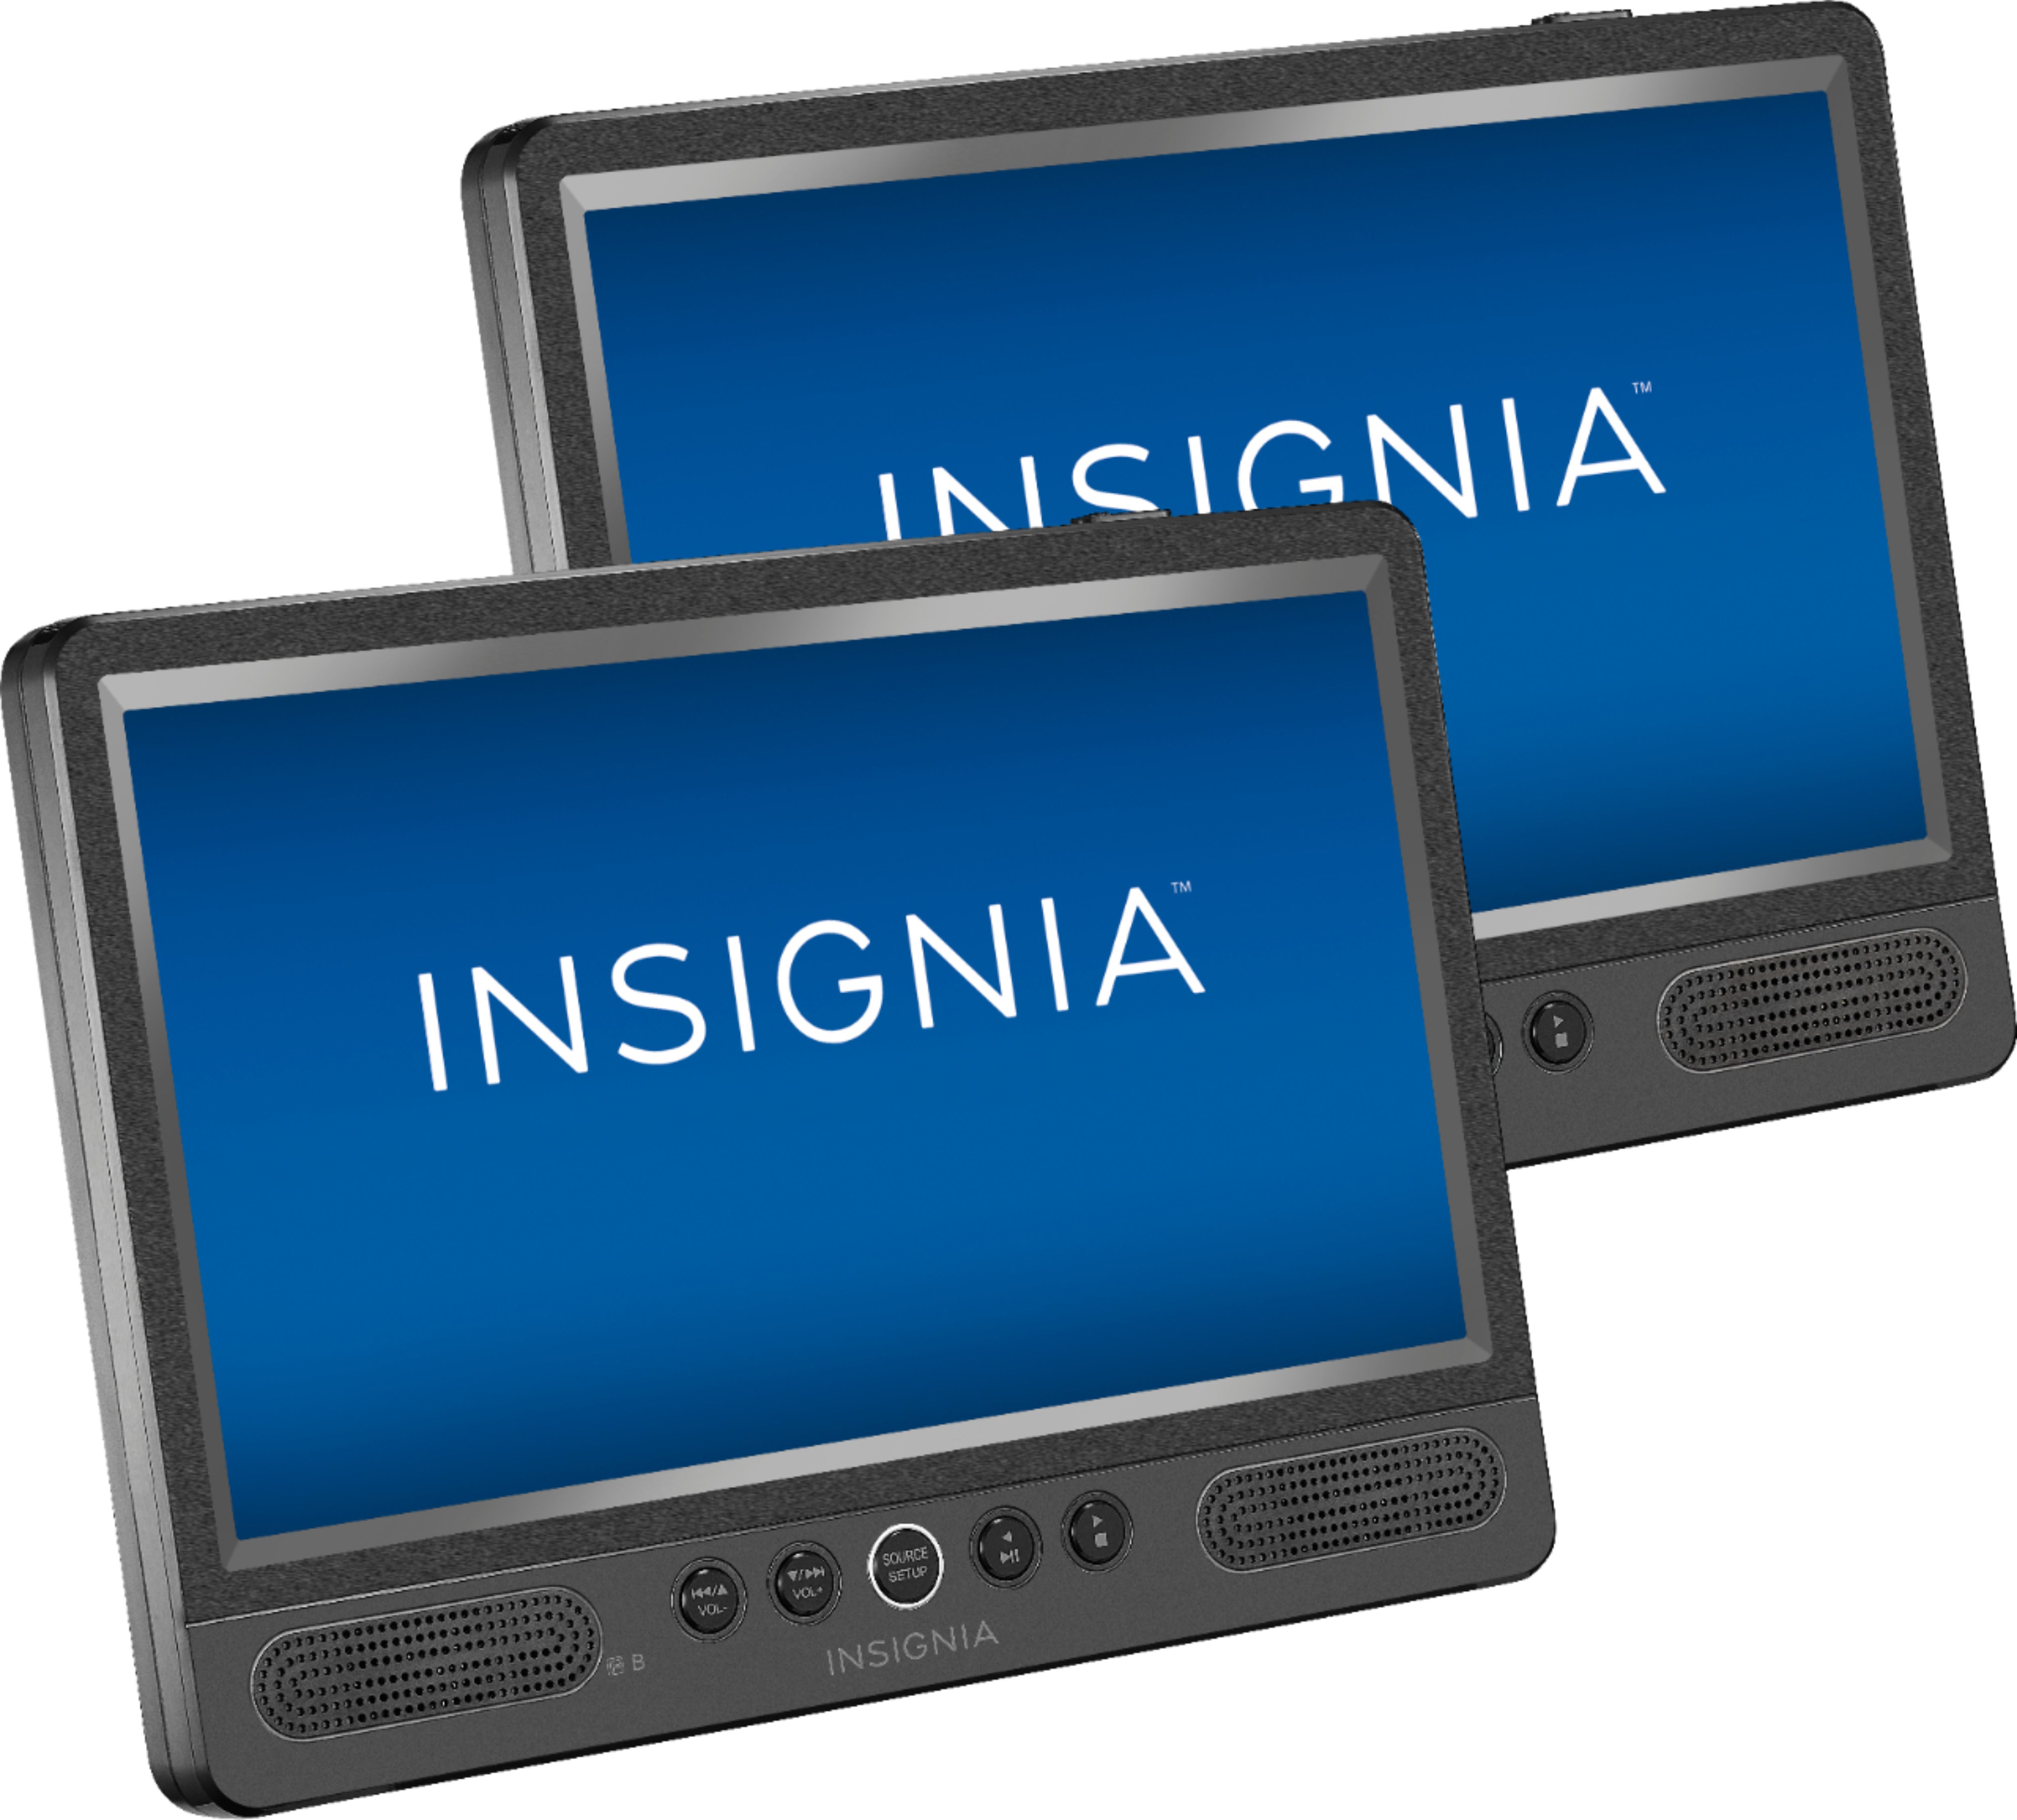 Angle View: Insignia™ - 10" Dual Screen Portable DVD Player - Black